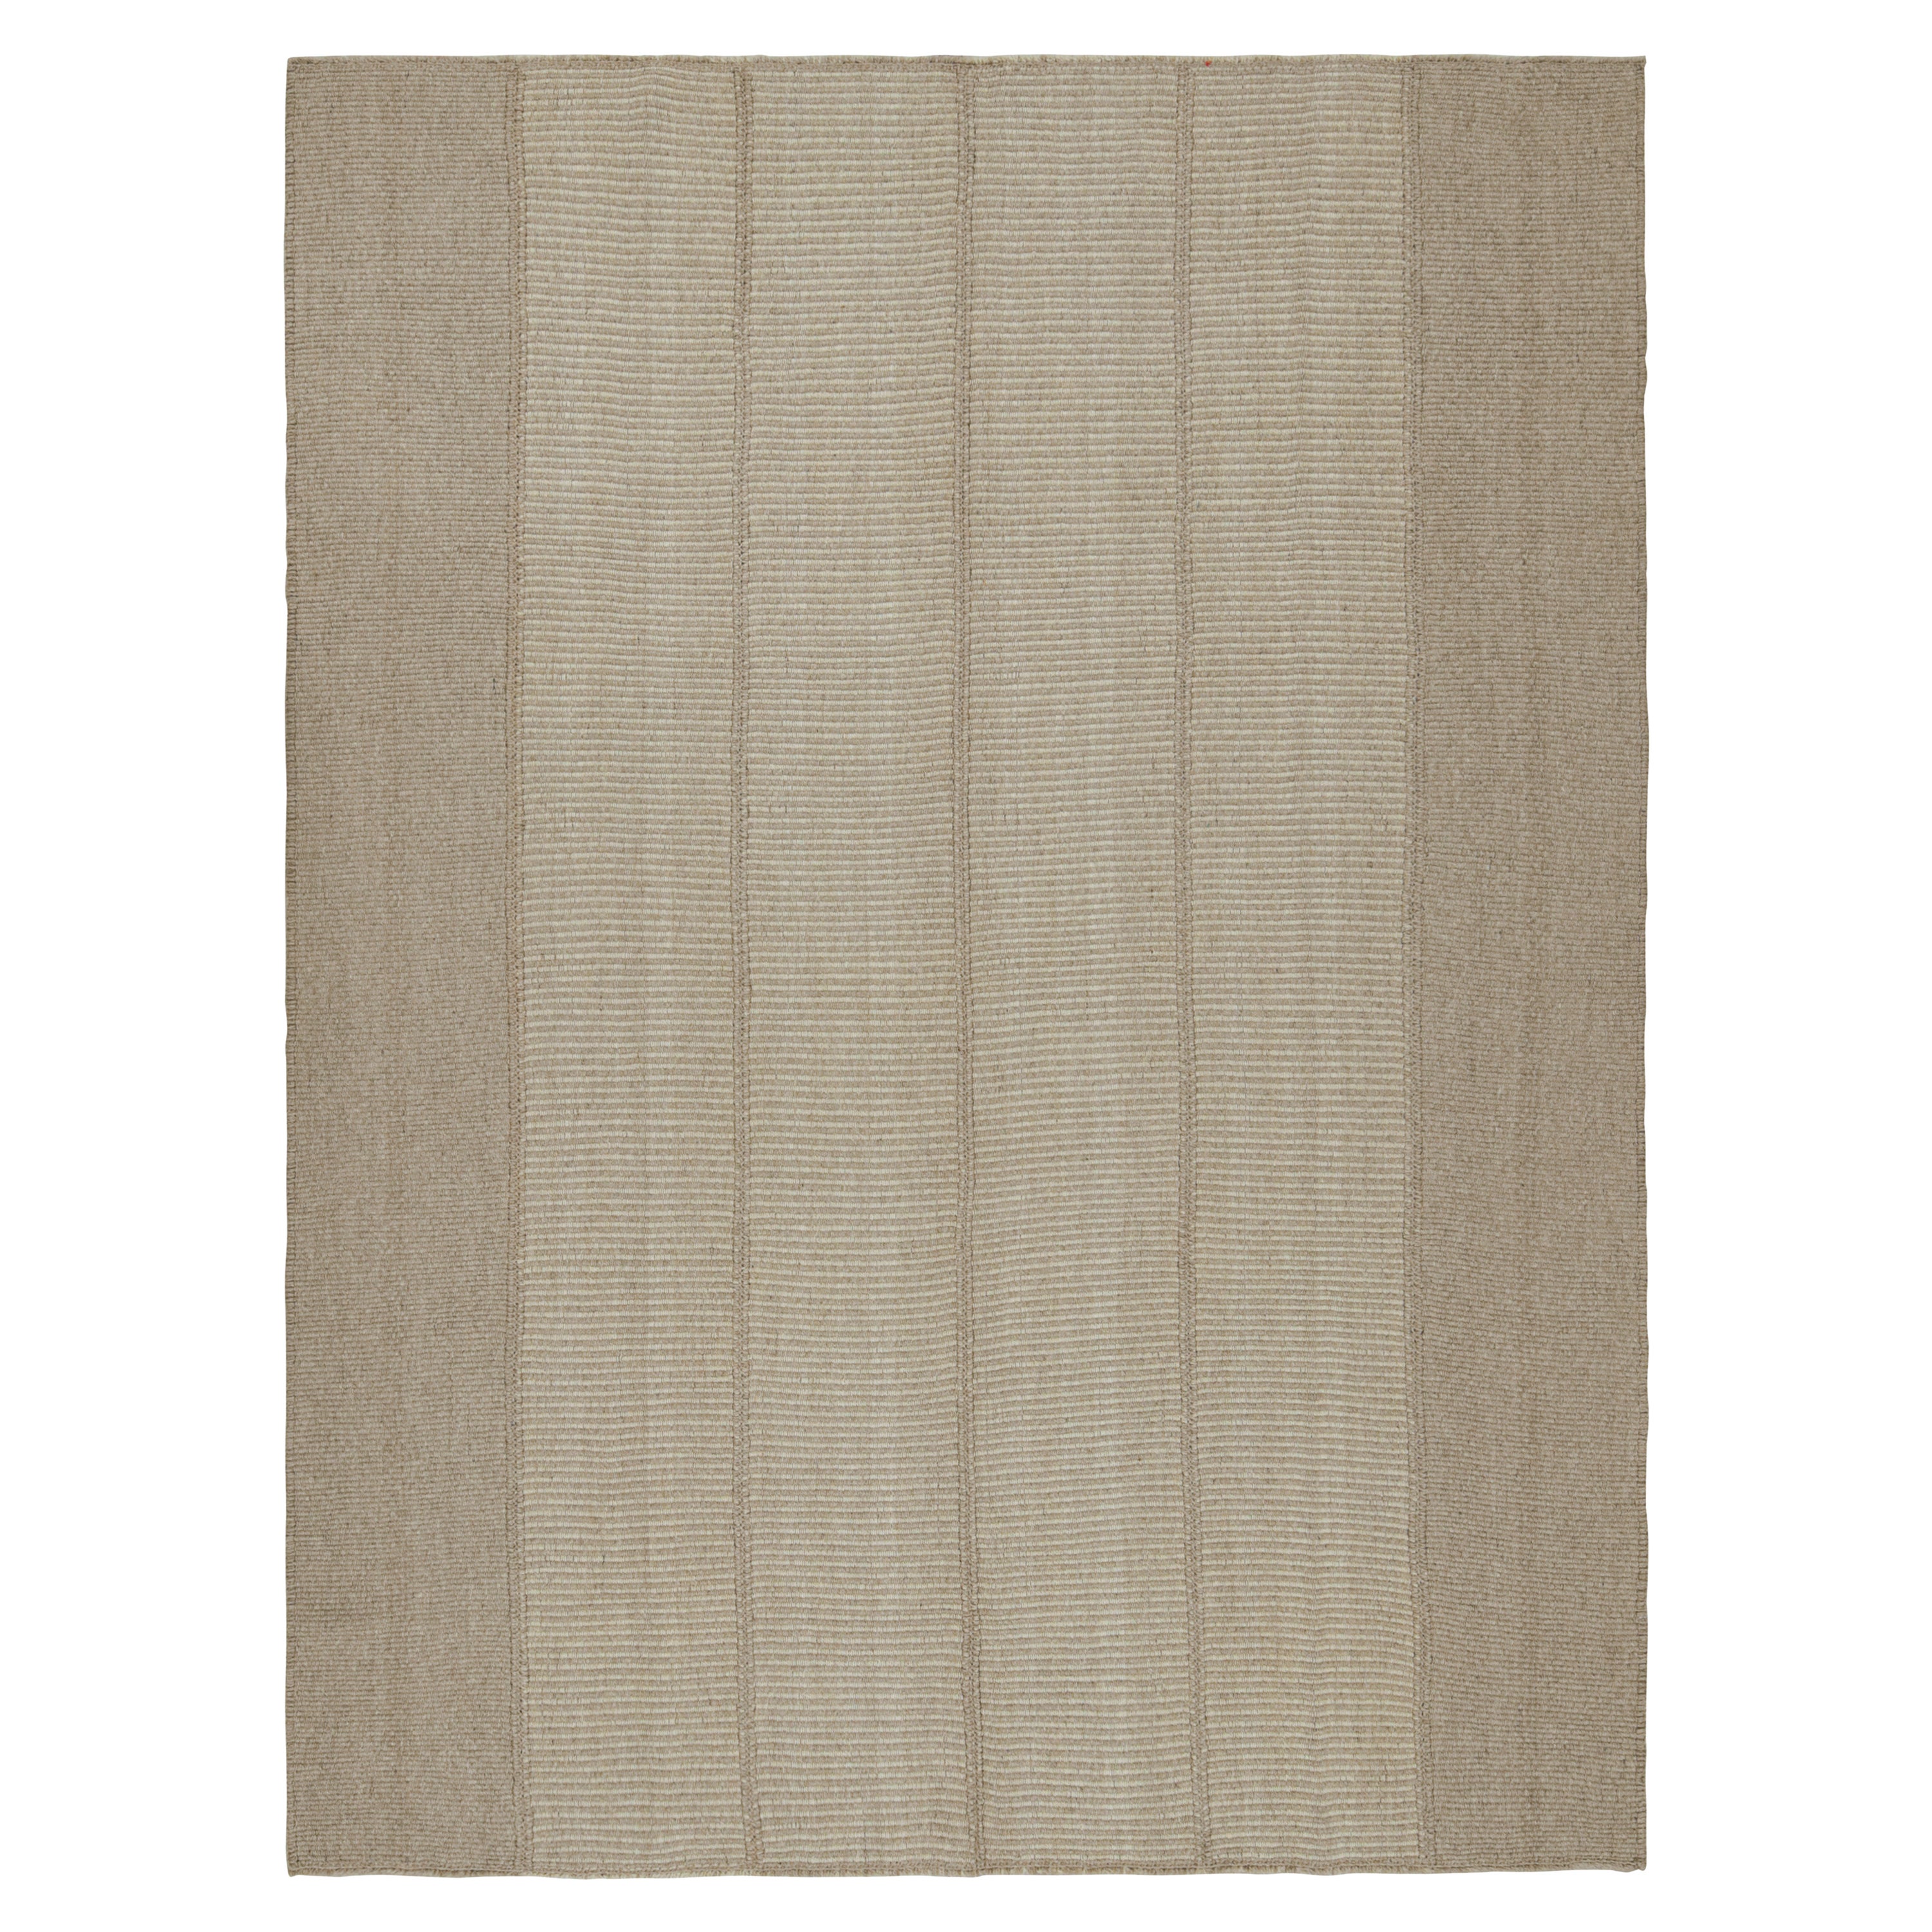 Rug & Kilim’s Contemporary Kilim with Light Beige-Brown Textural Stripes  For Sale